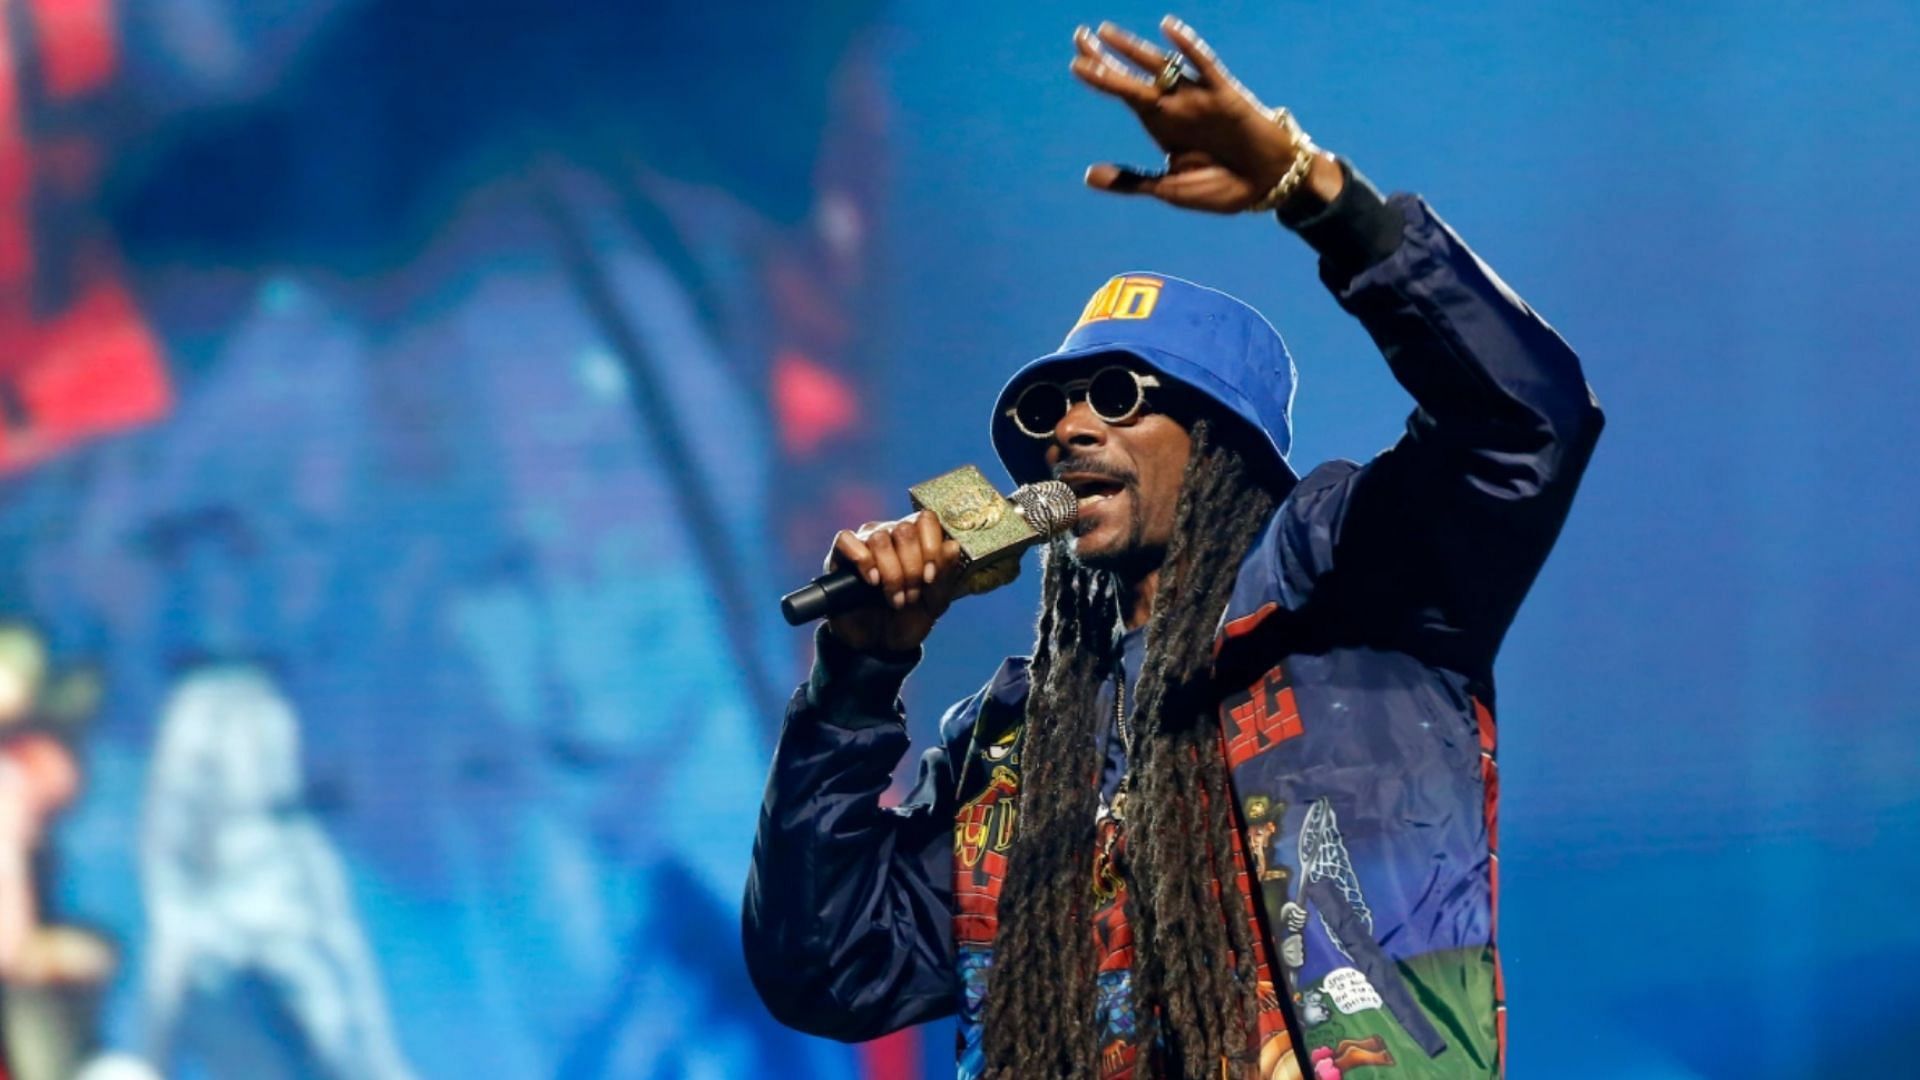 Snoop Dogg in concert (Image via Denis Truscello / Getty Images)